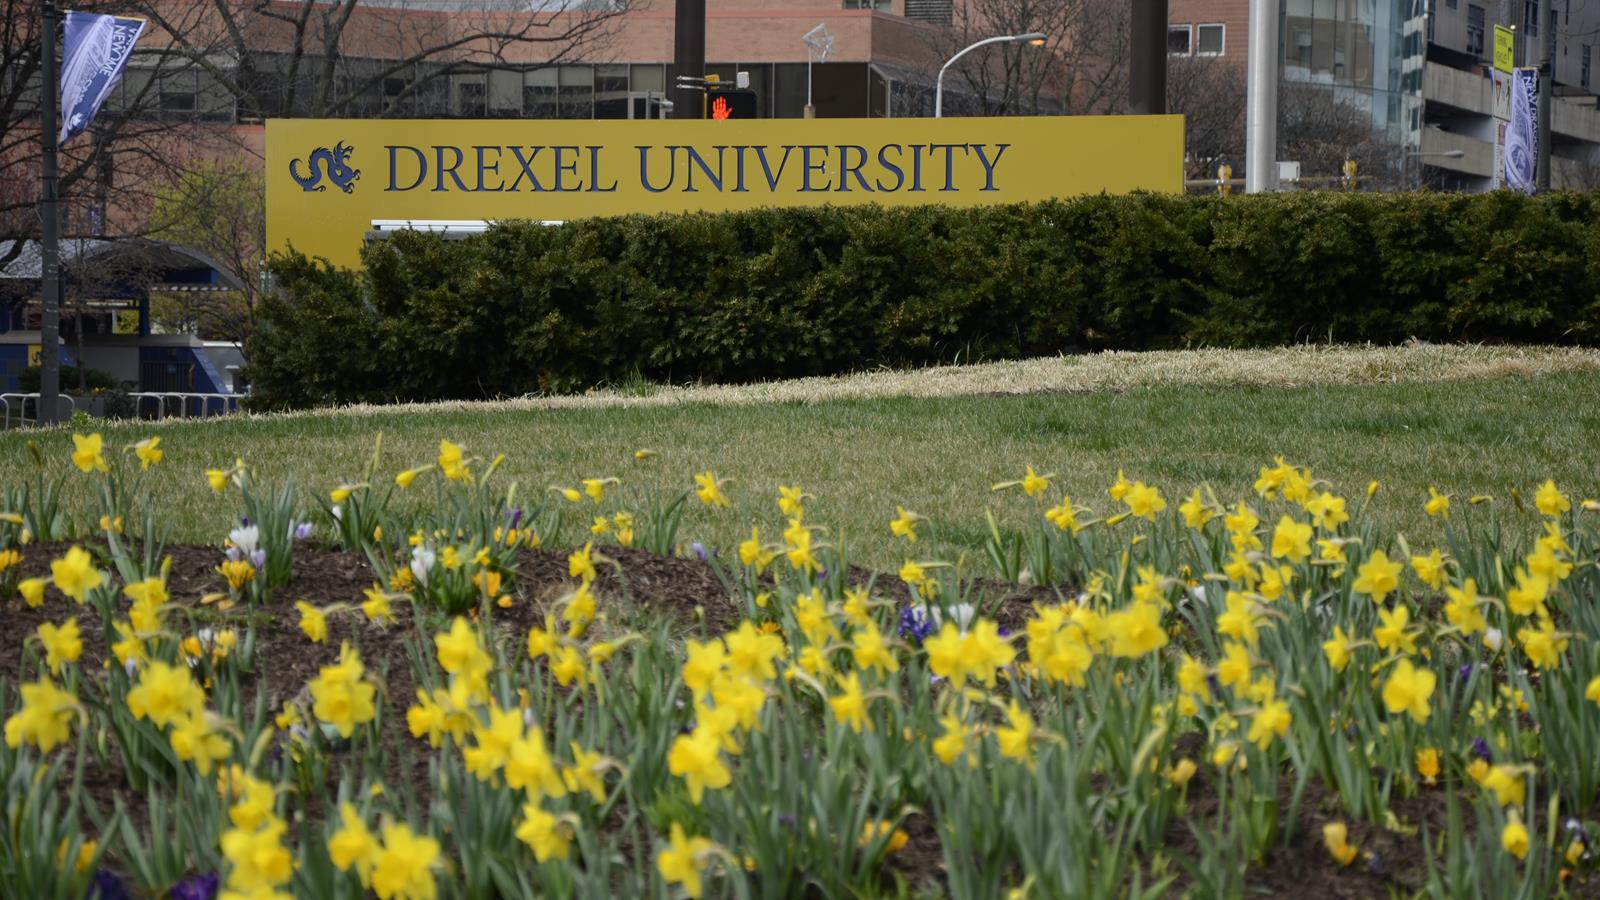 Drexel University sign with daffodils in front